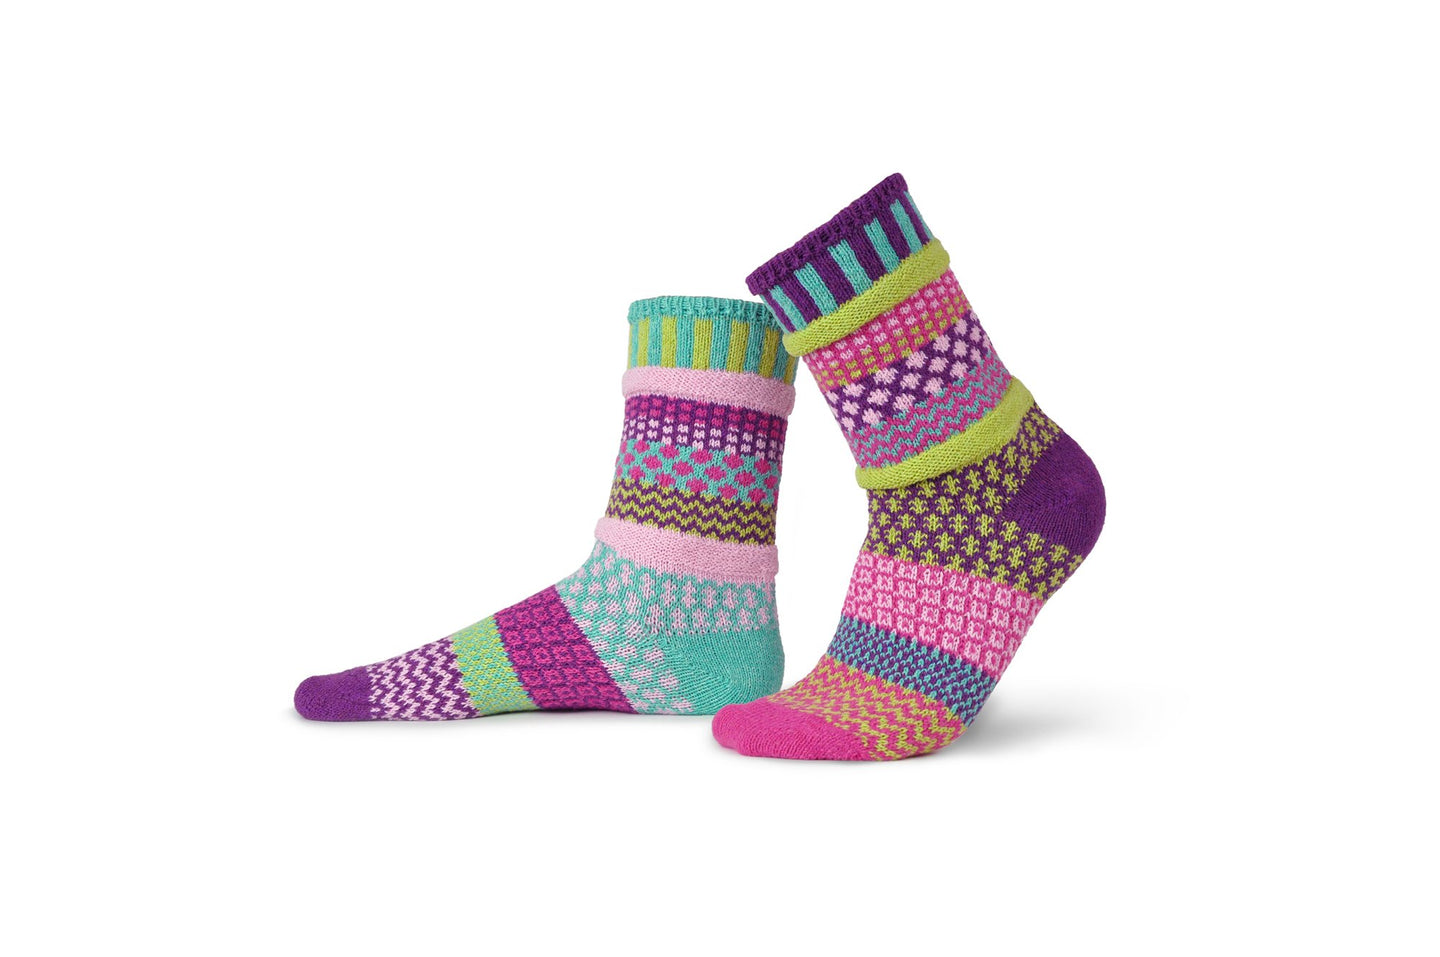 Solmate recycled cotton socks made in the USA, colour way Dahlia, in light pink, magenta, lime green, purple, turquoise.